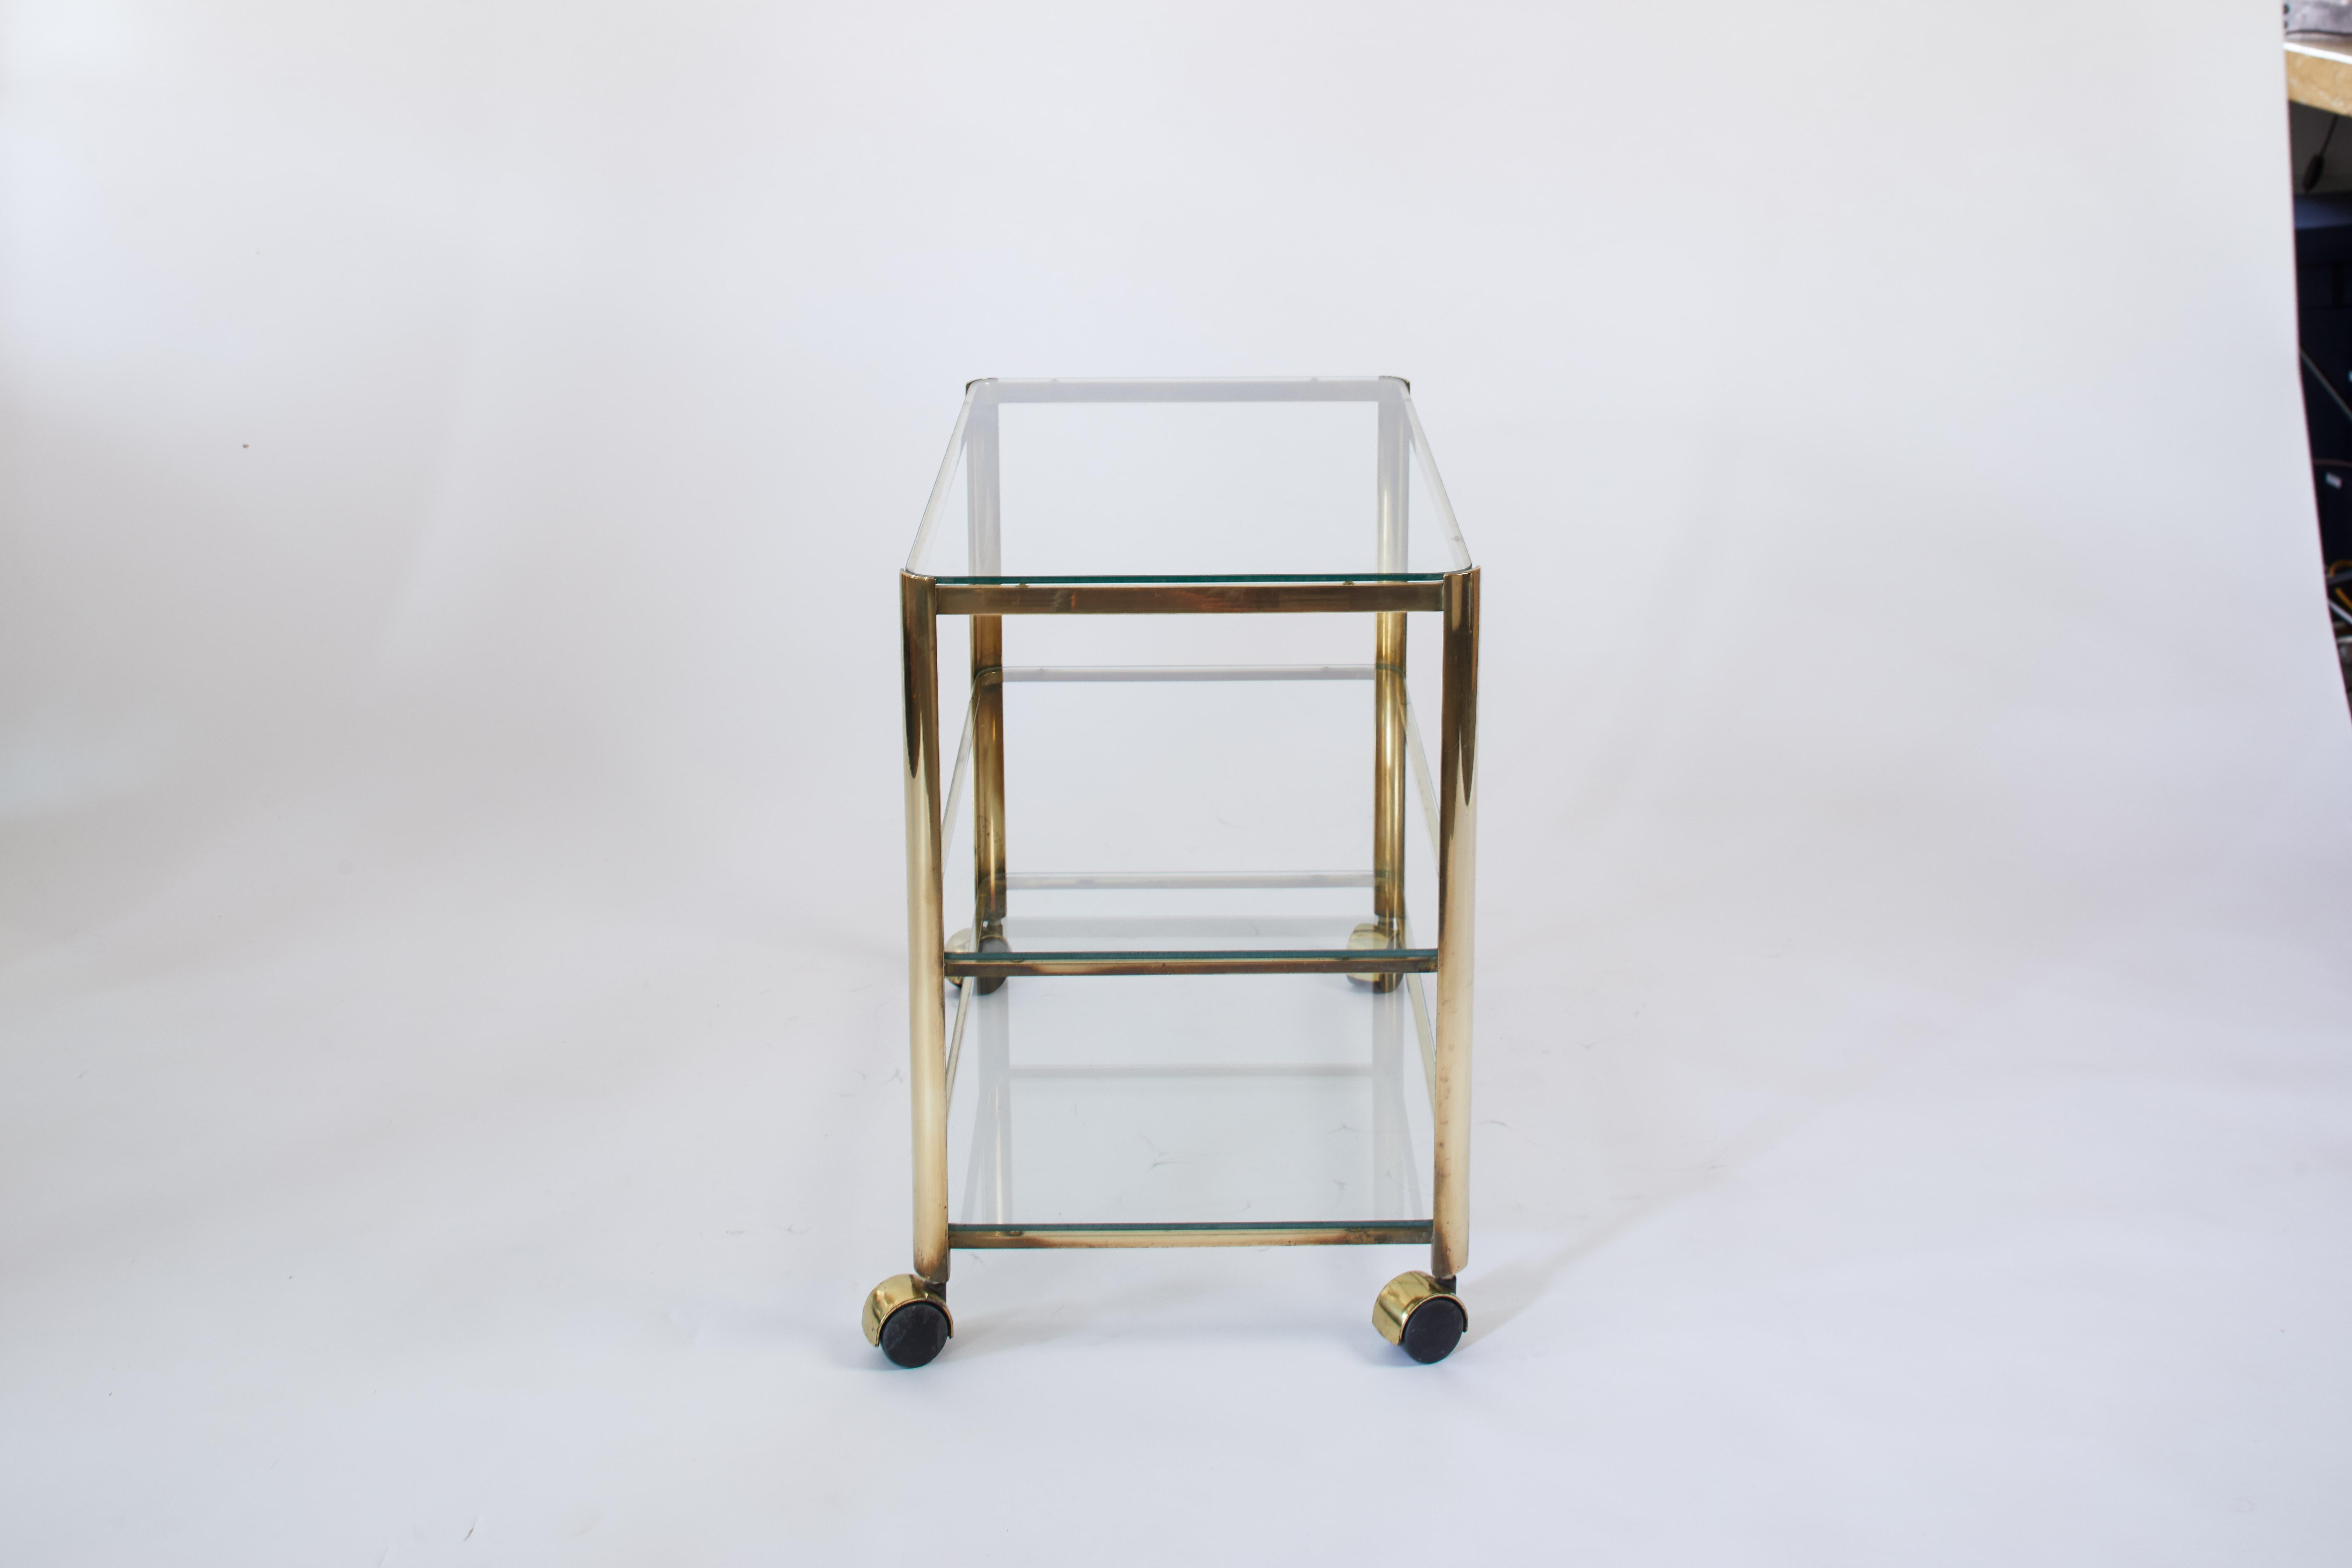 1960s French quinet bronze and smoked glass bar cart.